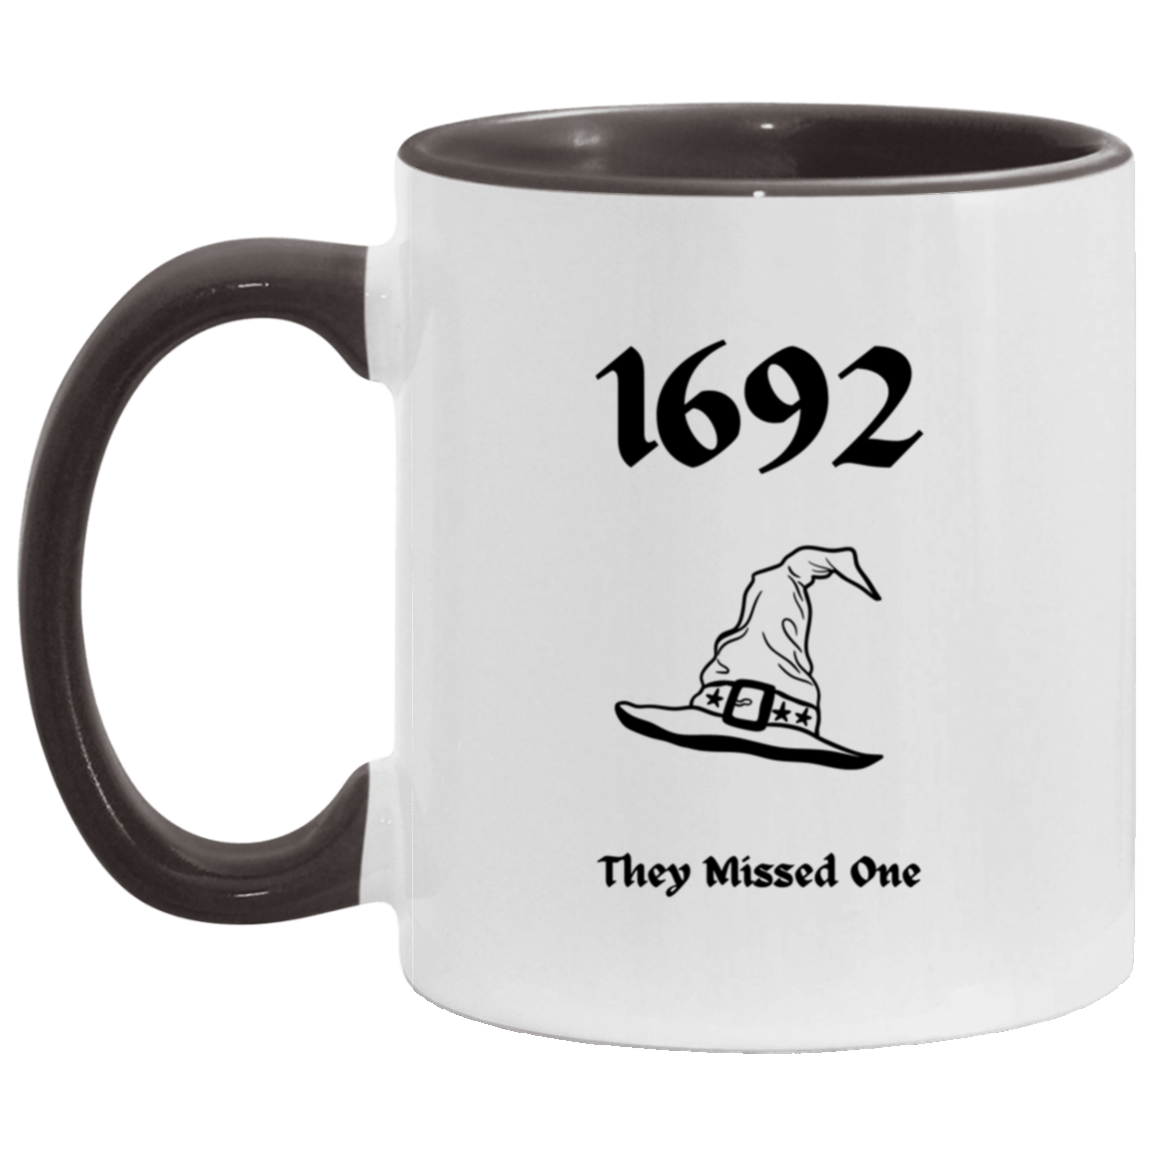 Get trendy with 1692 11 oz. Accent Mug - Drinkware available at Good Gift Company. Grab yours for $16 today!